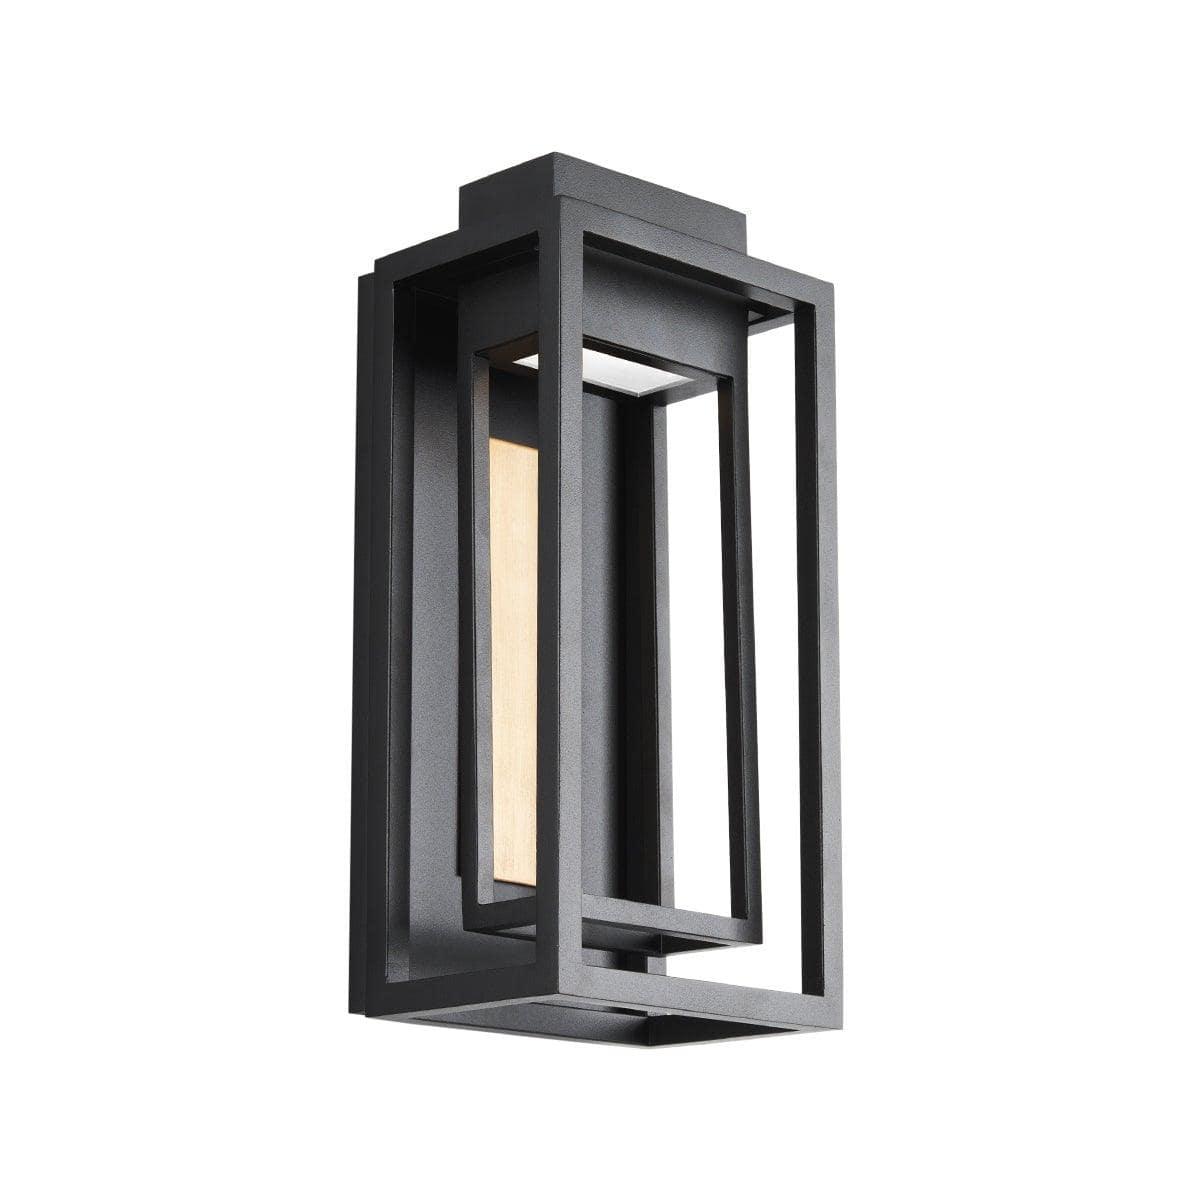 Modern Forms - Dorne LED Outdoor Wall Mount - WS-W57014-BK/AB | Montreal Lighting & Hardware